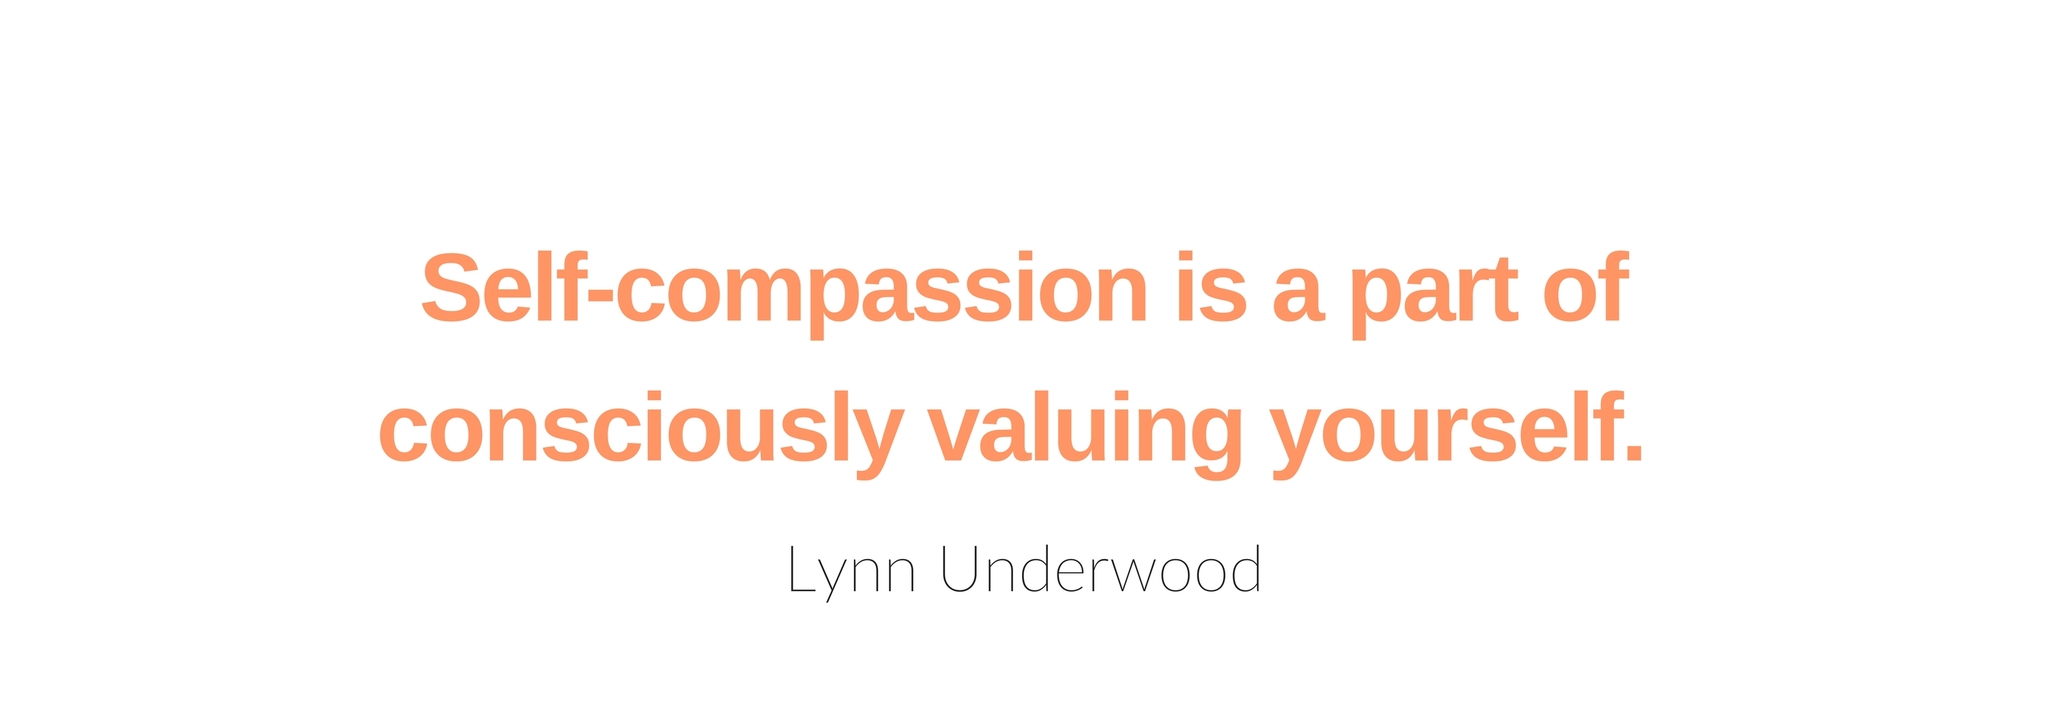 Self-compassion is a part of consciously valuing yourself. 